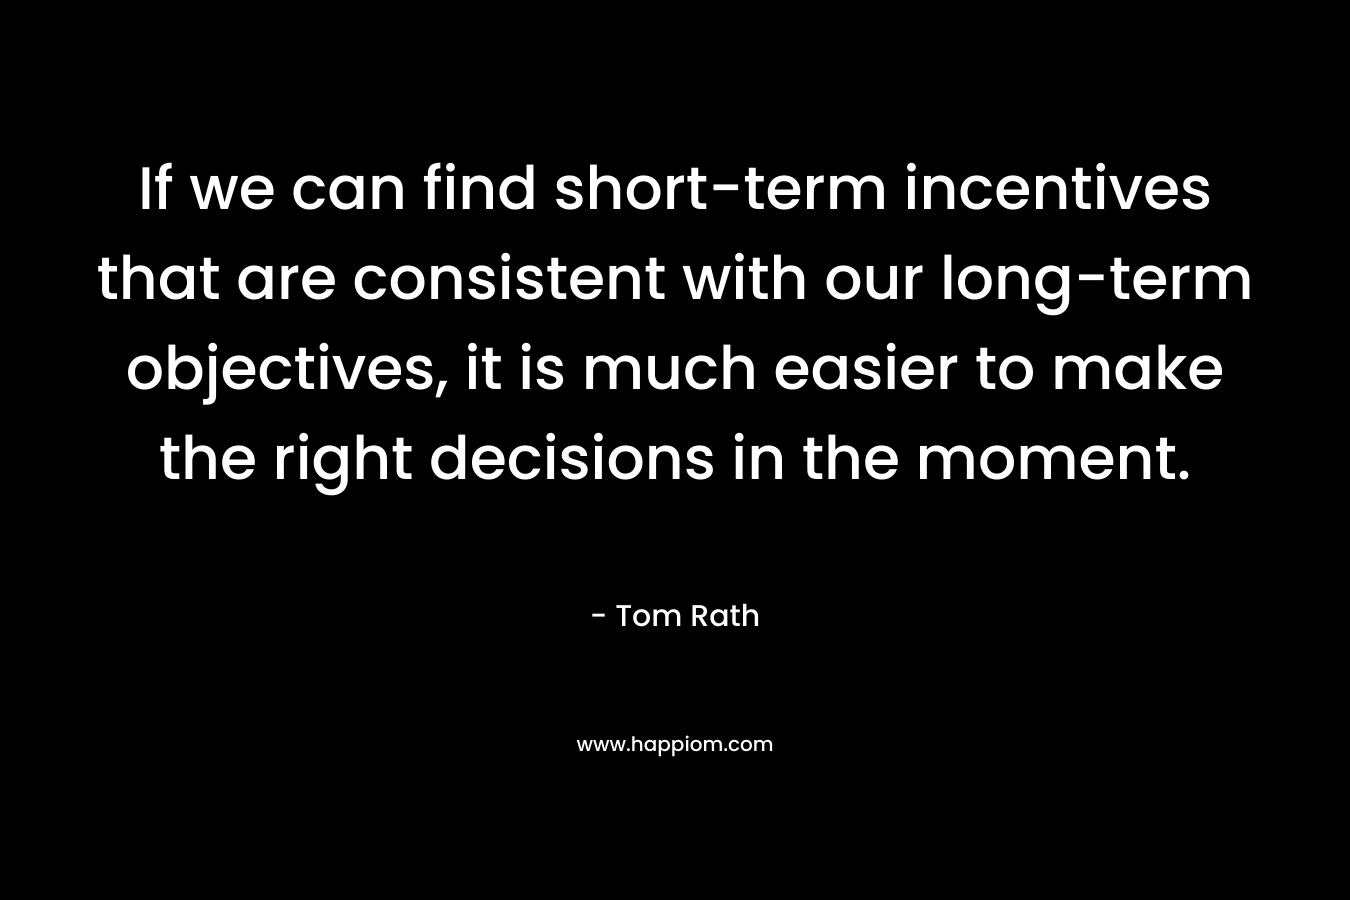 If we can find short-term incentives that are consistent with our long-term objectives, it is much easier to make the right decisions in the moment.